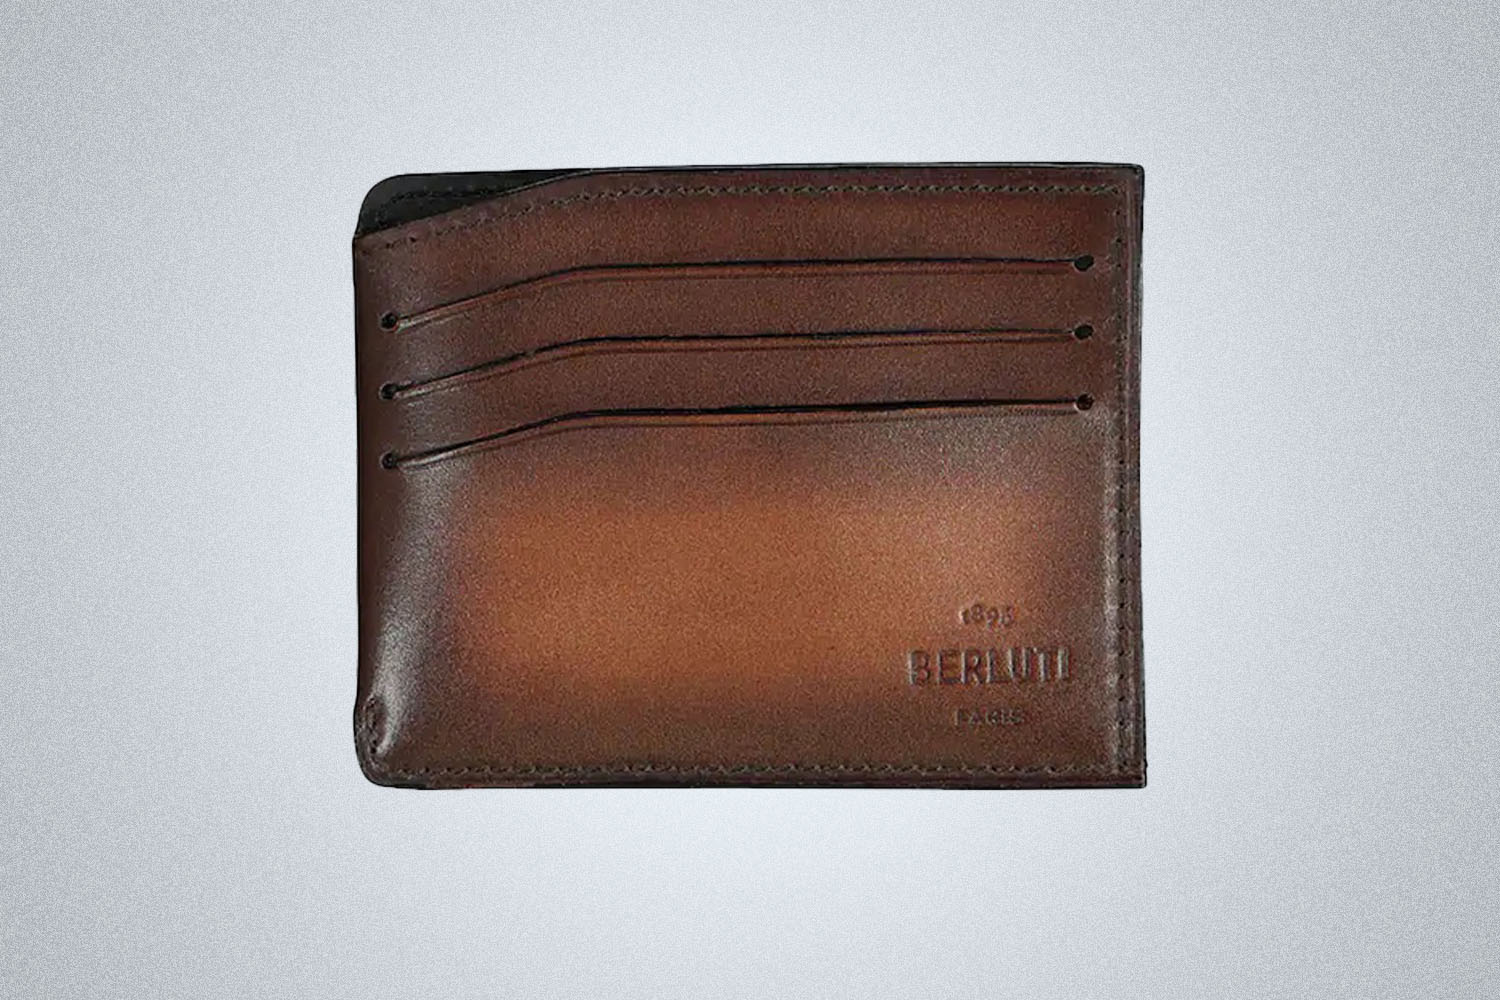 A leather wallet from Berluti on a grey background